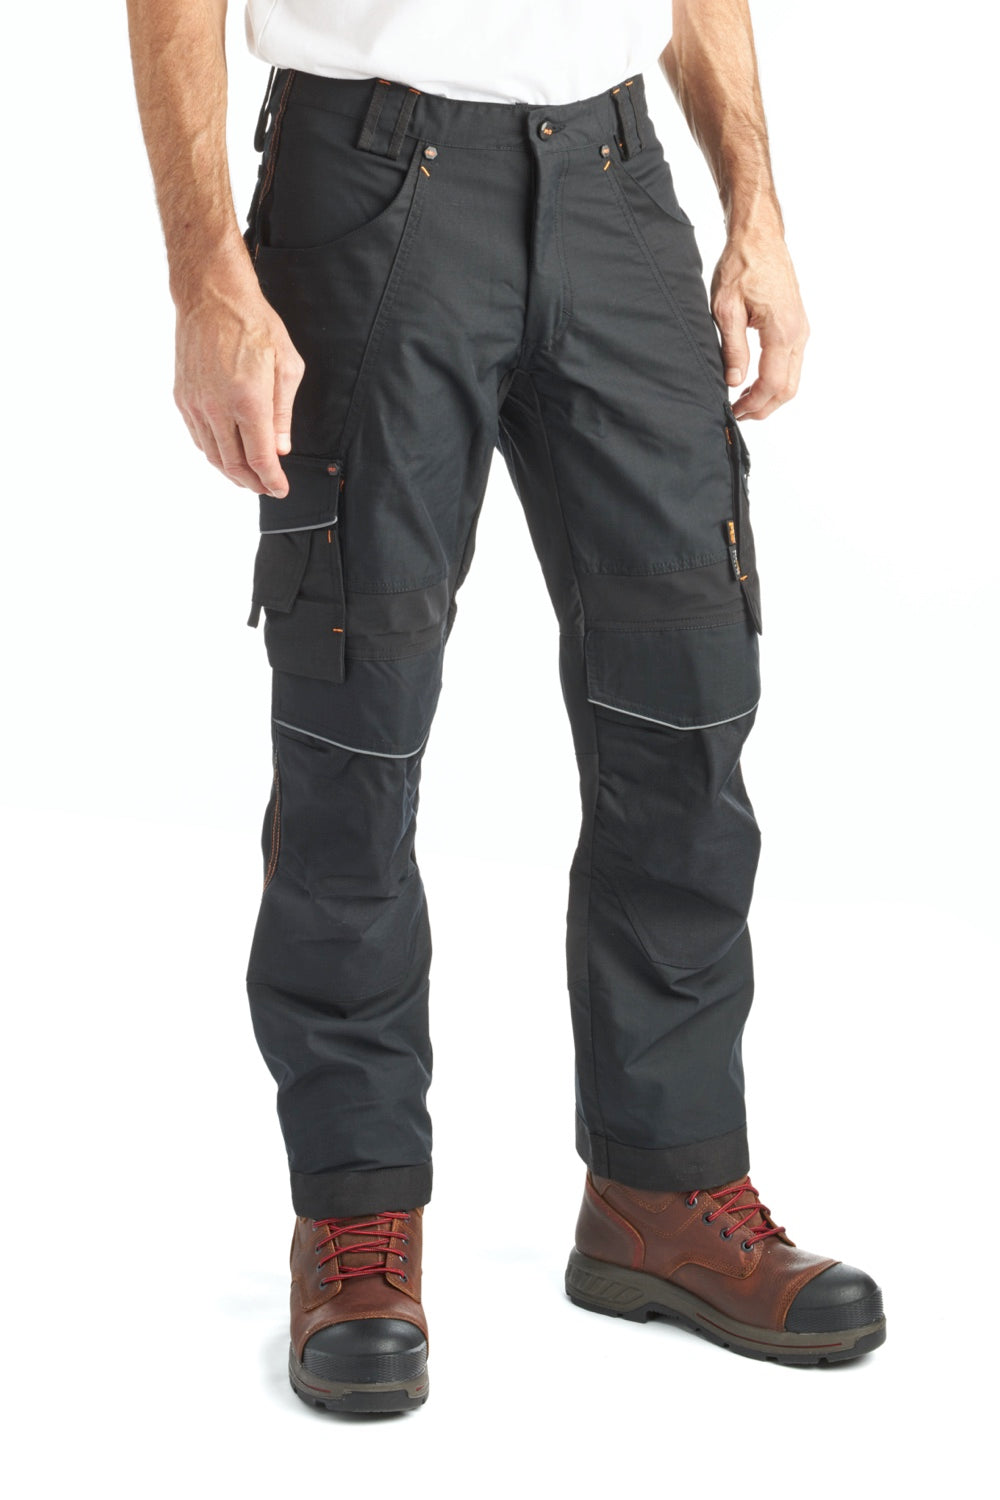 Timberland Cargo Trousers Apparel - Buy Timberland Cargo Trousers Apparel  online in India